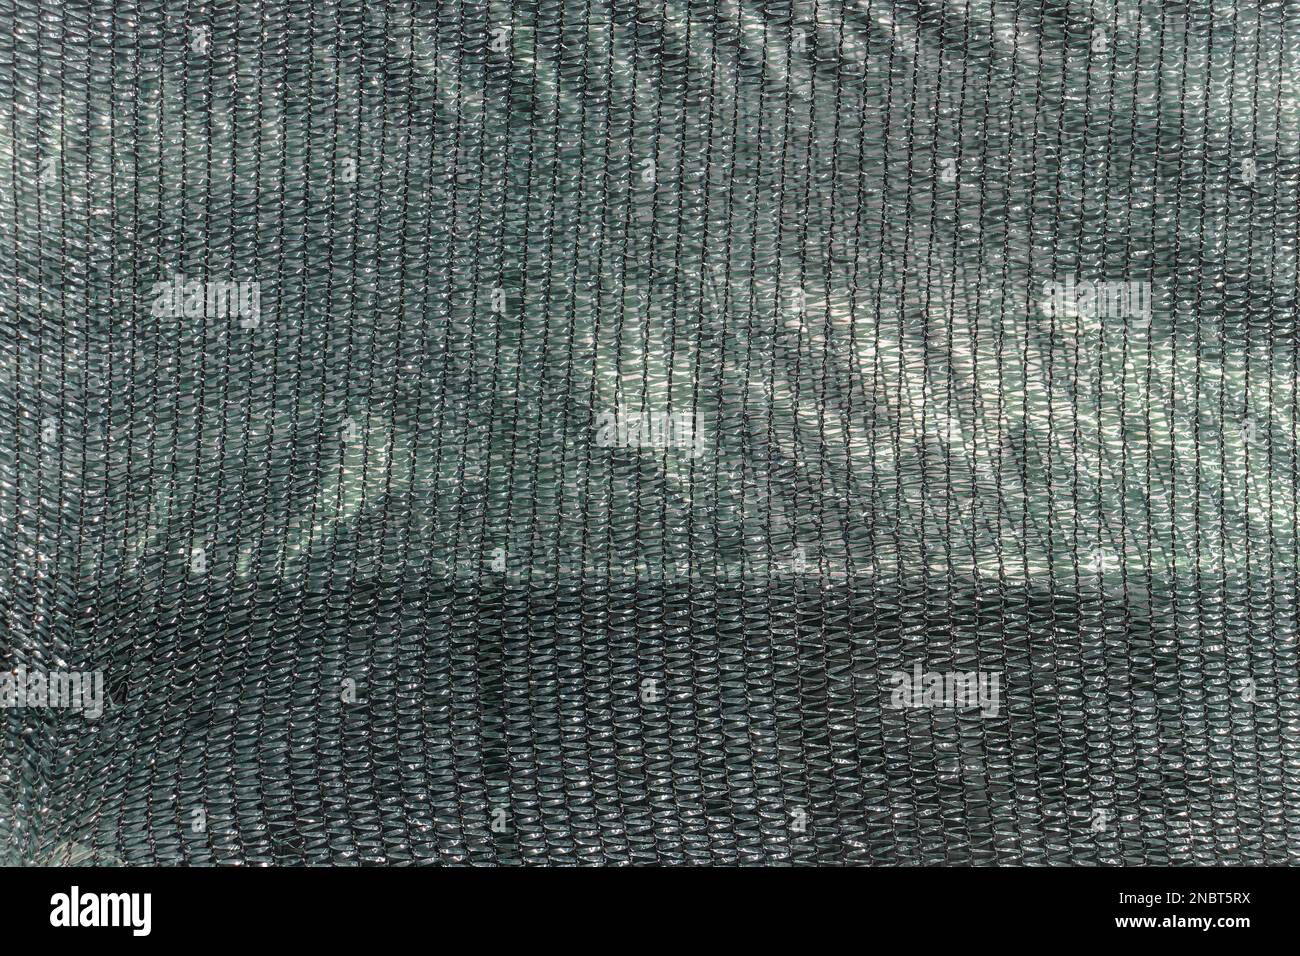 Silvery fabric stitched with black threads. Silver glitter background ...